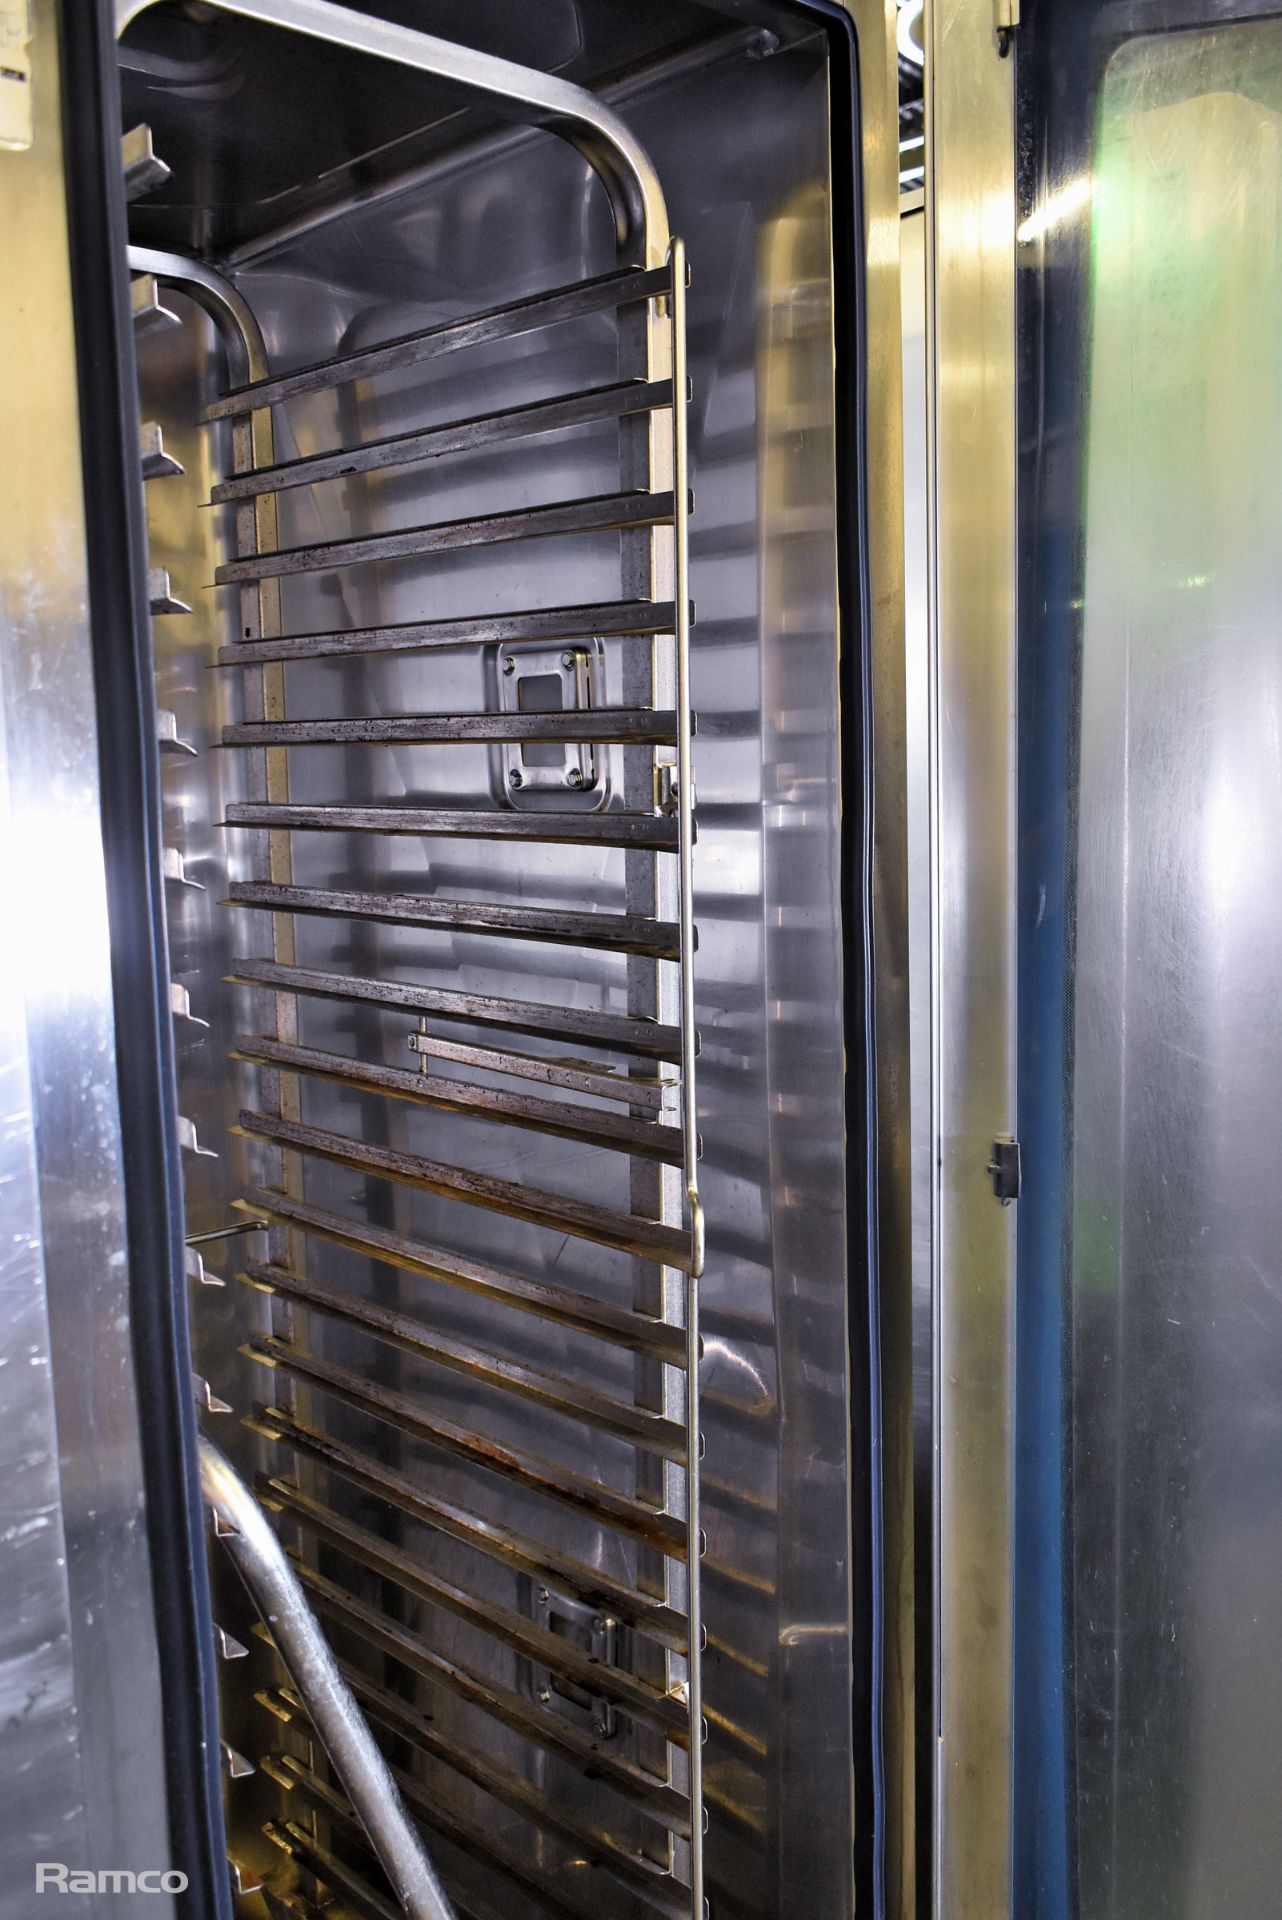 Rational CombiMaster Plus CMP 201G stainless steel 20 grid combi oven - W 880 x D 1000 x H 1850mm - Image 5 of 8